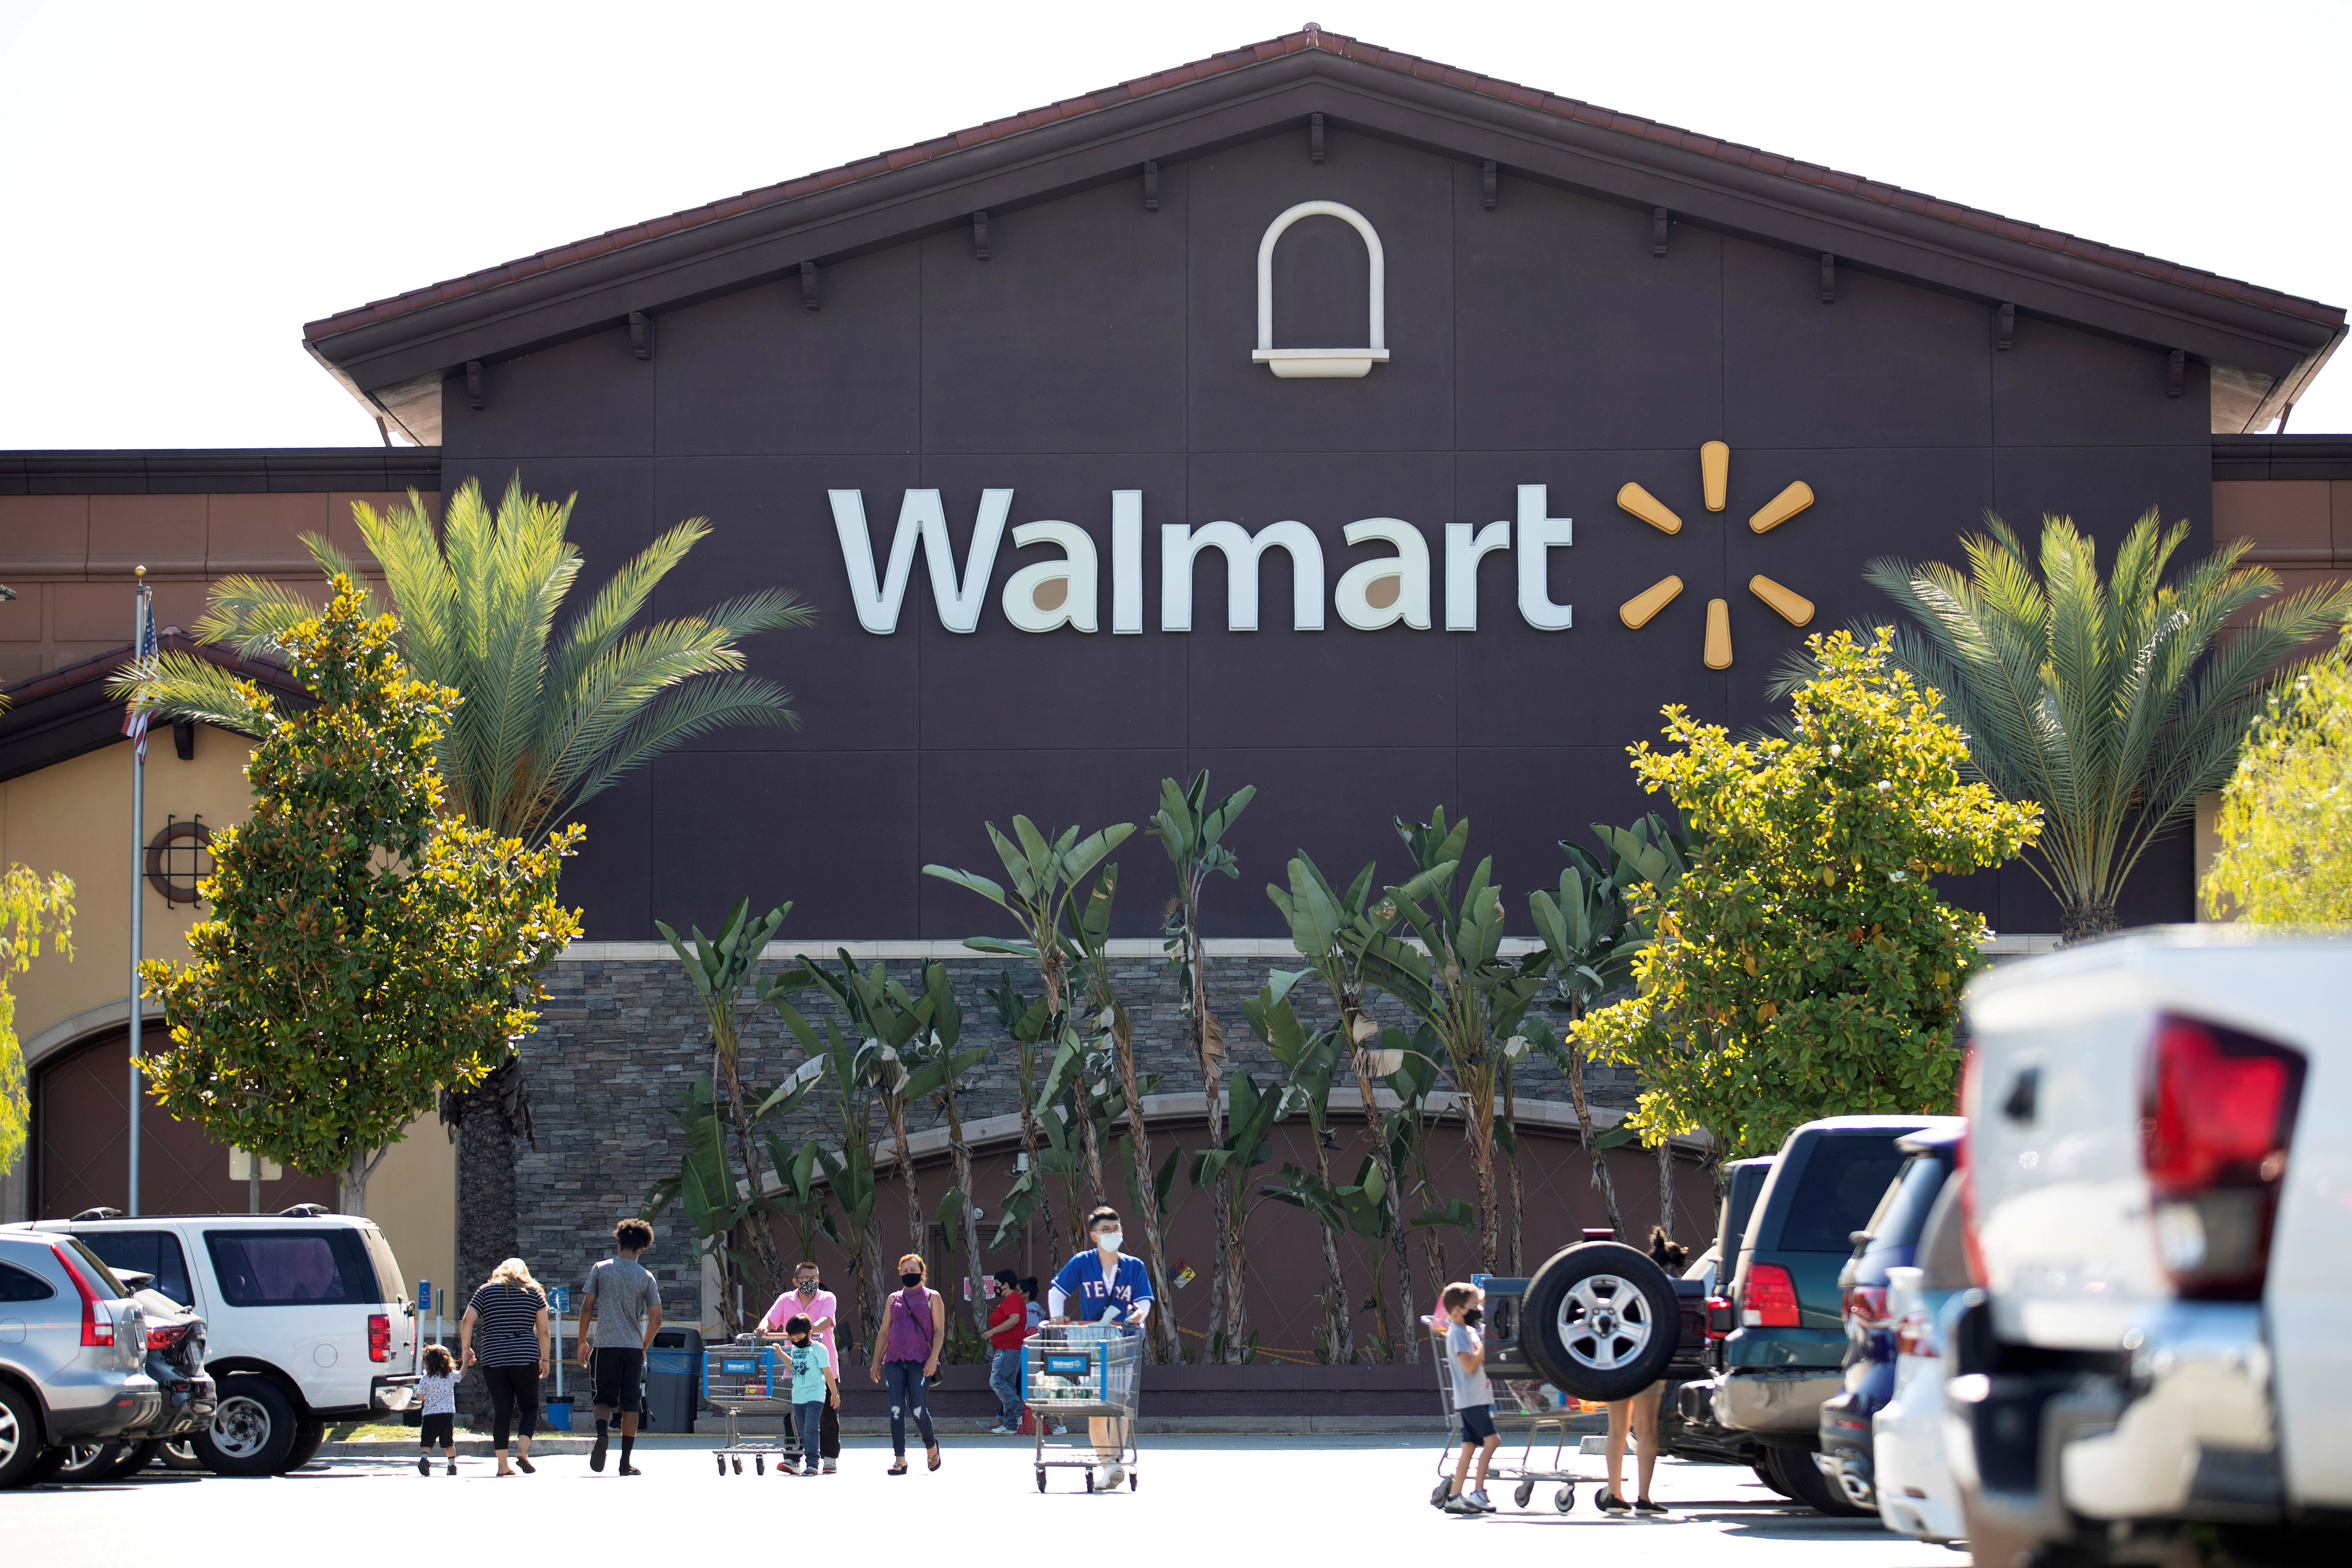 Shoppers at Walmart Superstore amid outbreak of the coronavirus disease (COVID-19) in Rosemead